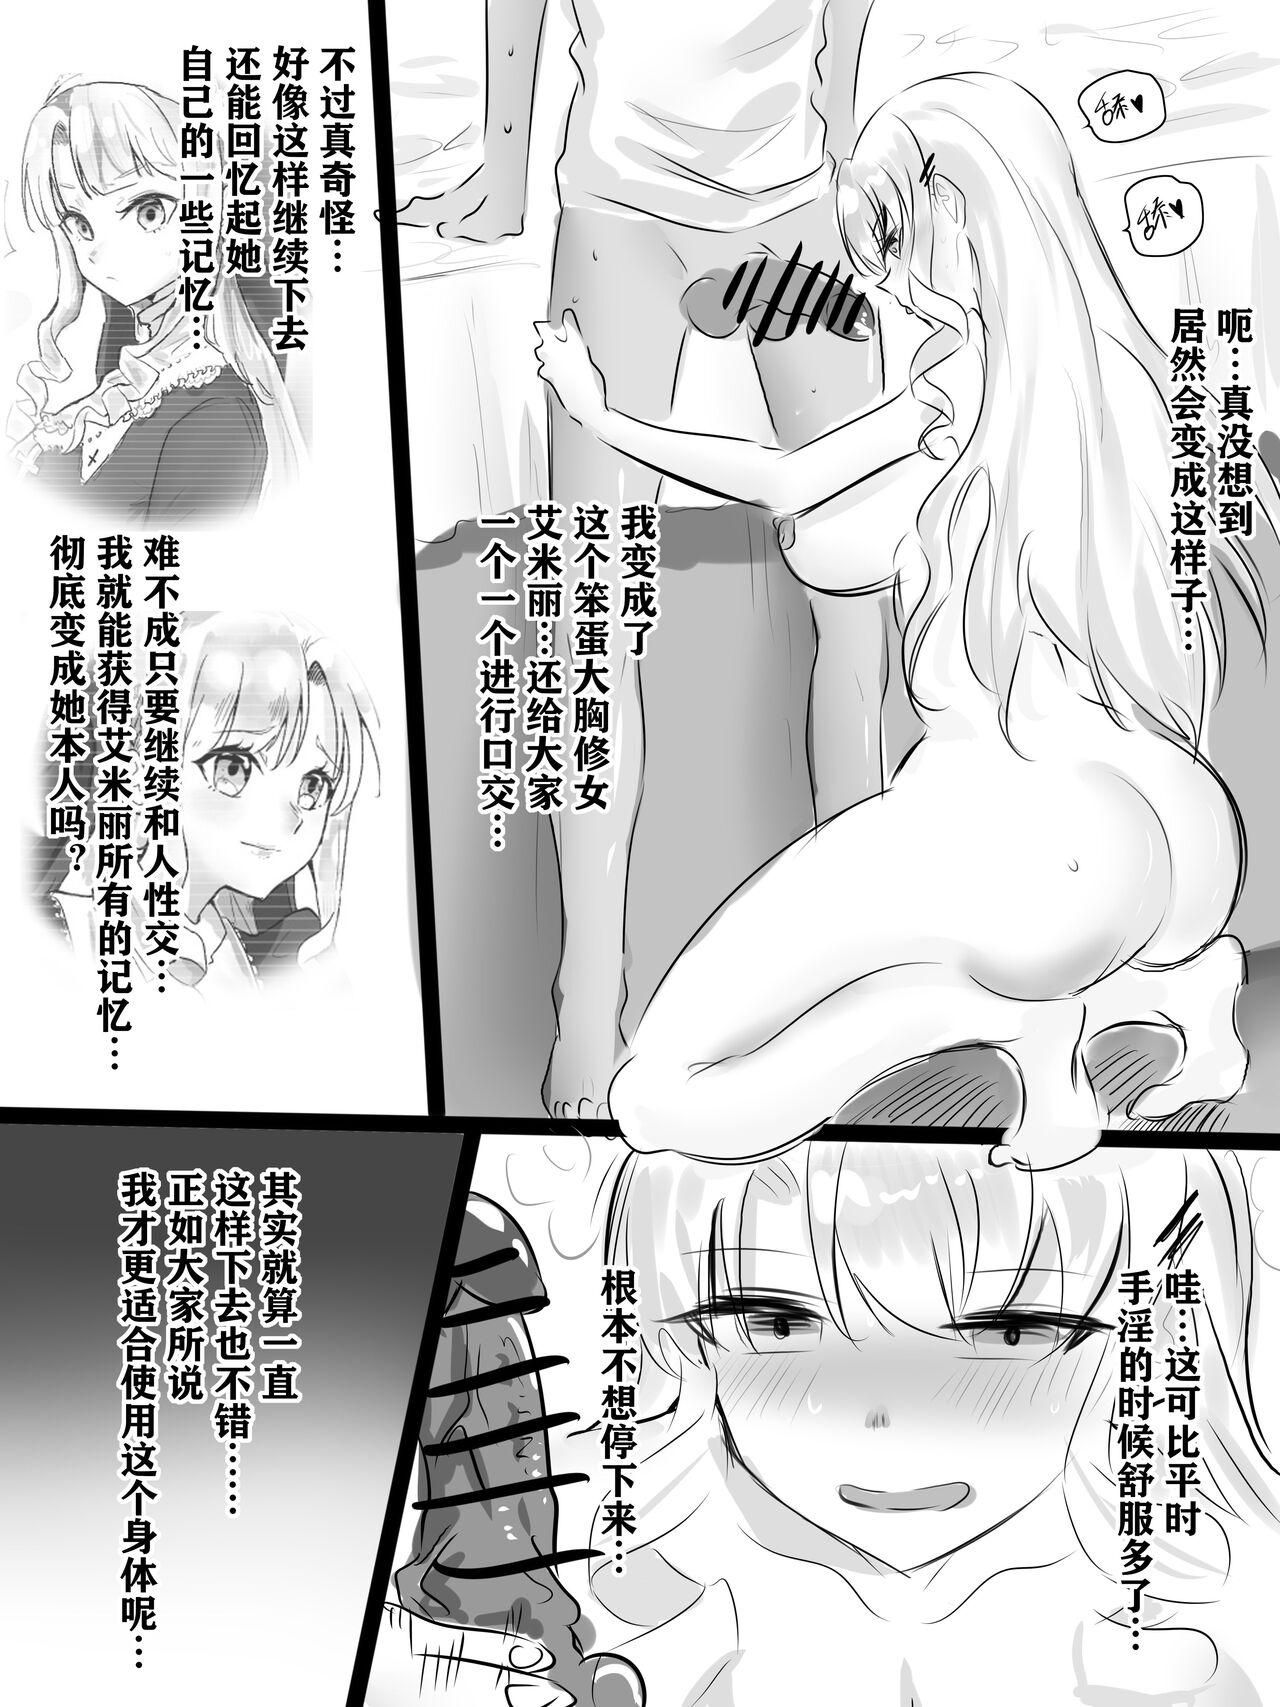 Boots 修女艾米麗 Sister Emily 4some - Page 7